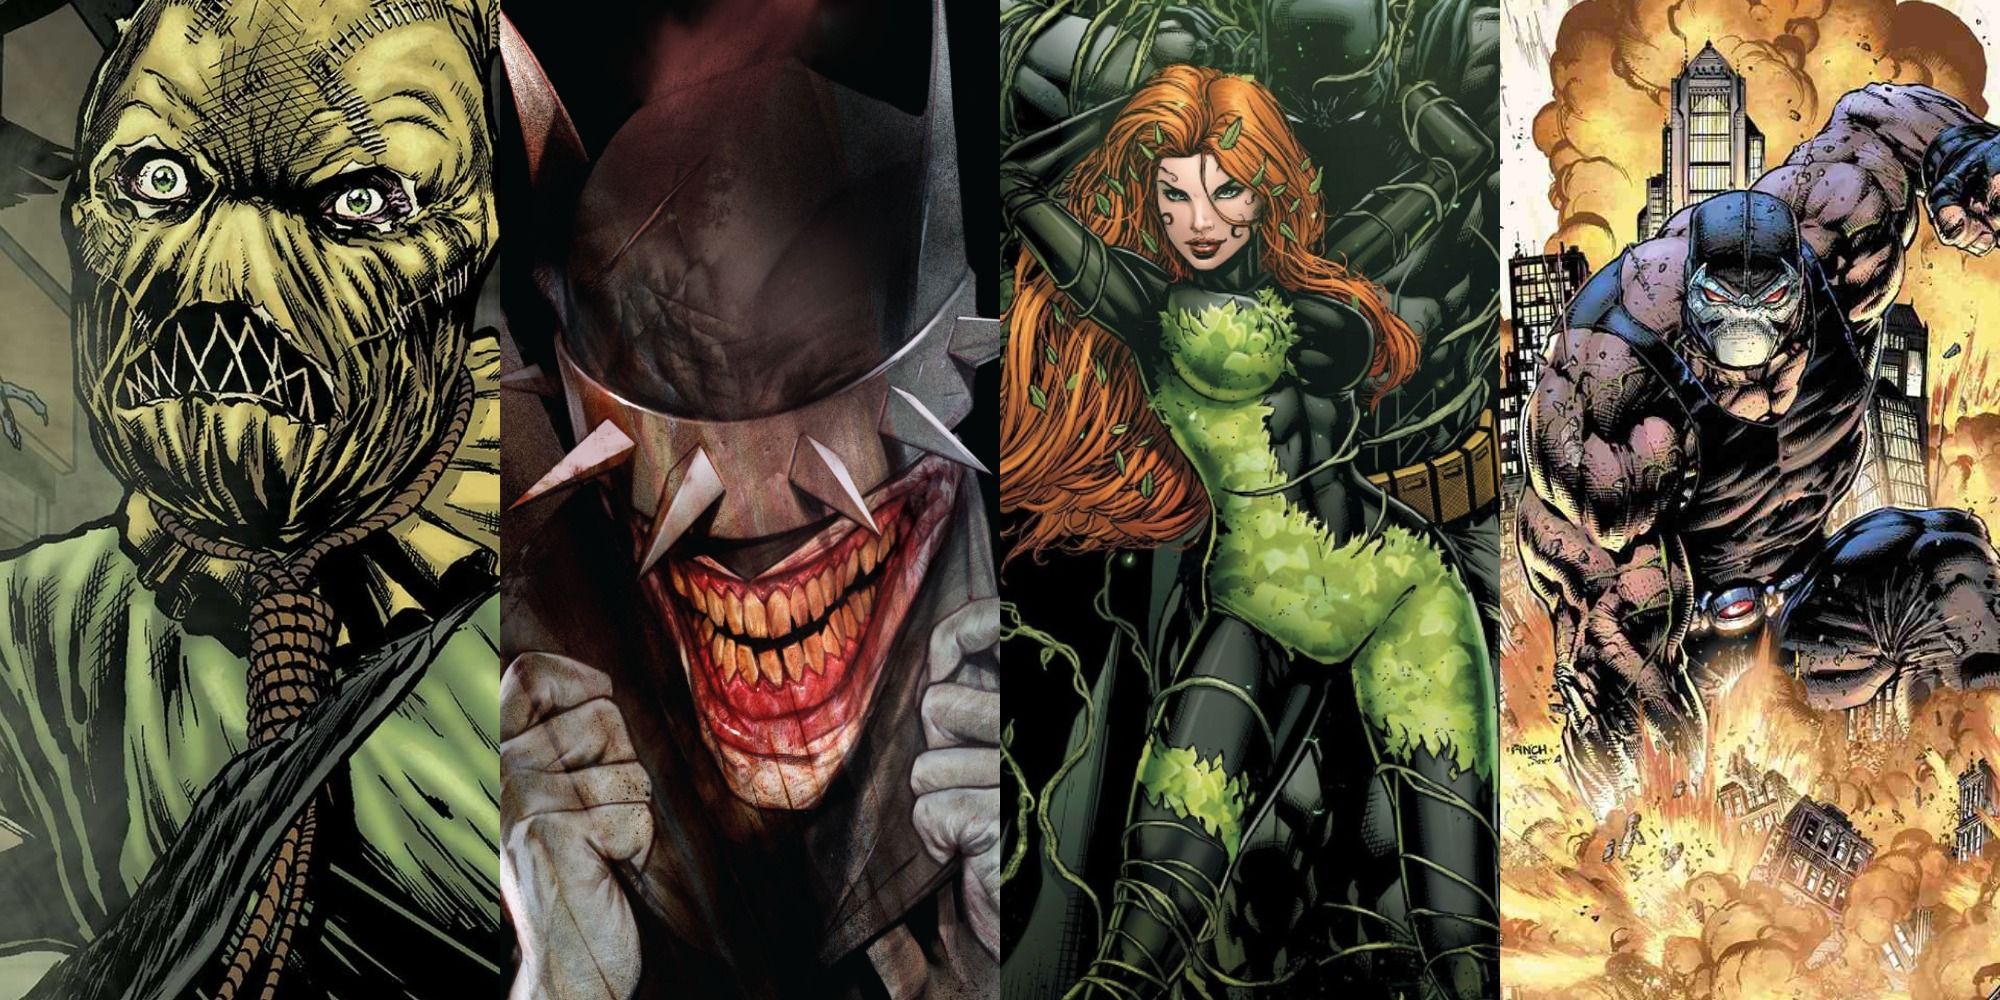 Combined images of the Batman villains Scarecrow, Poison Ivy. Bane, and The Batman Who Laughs